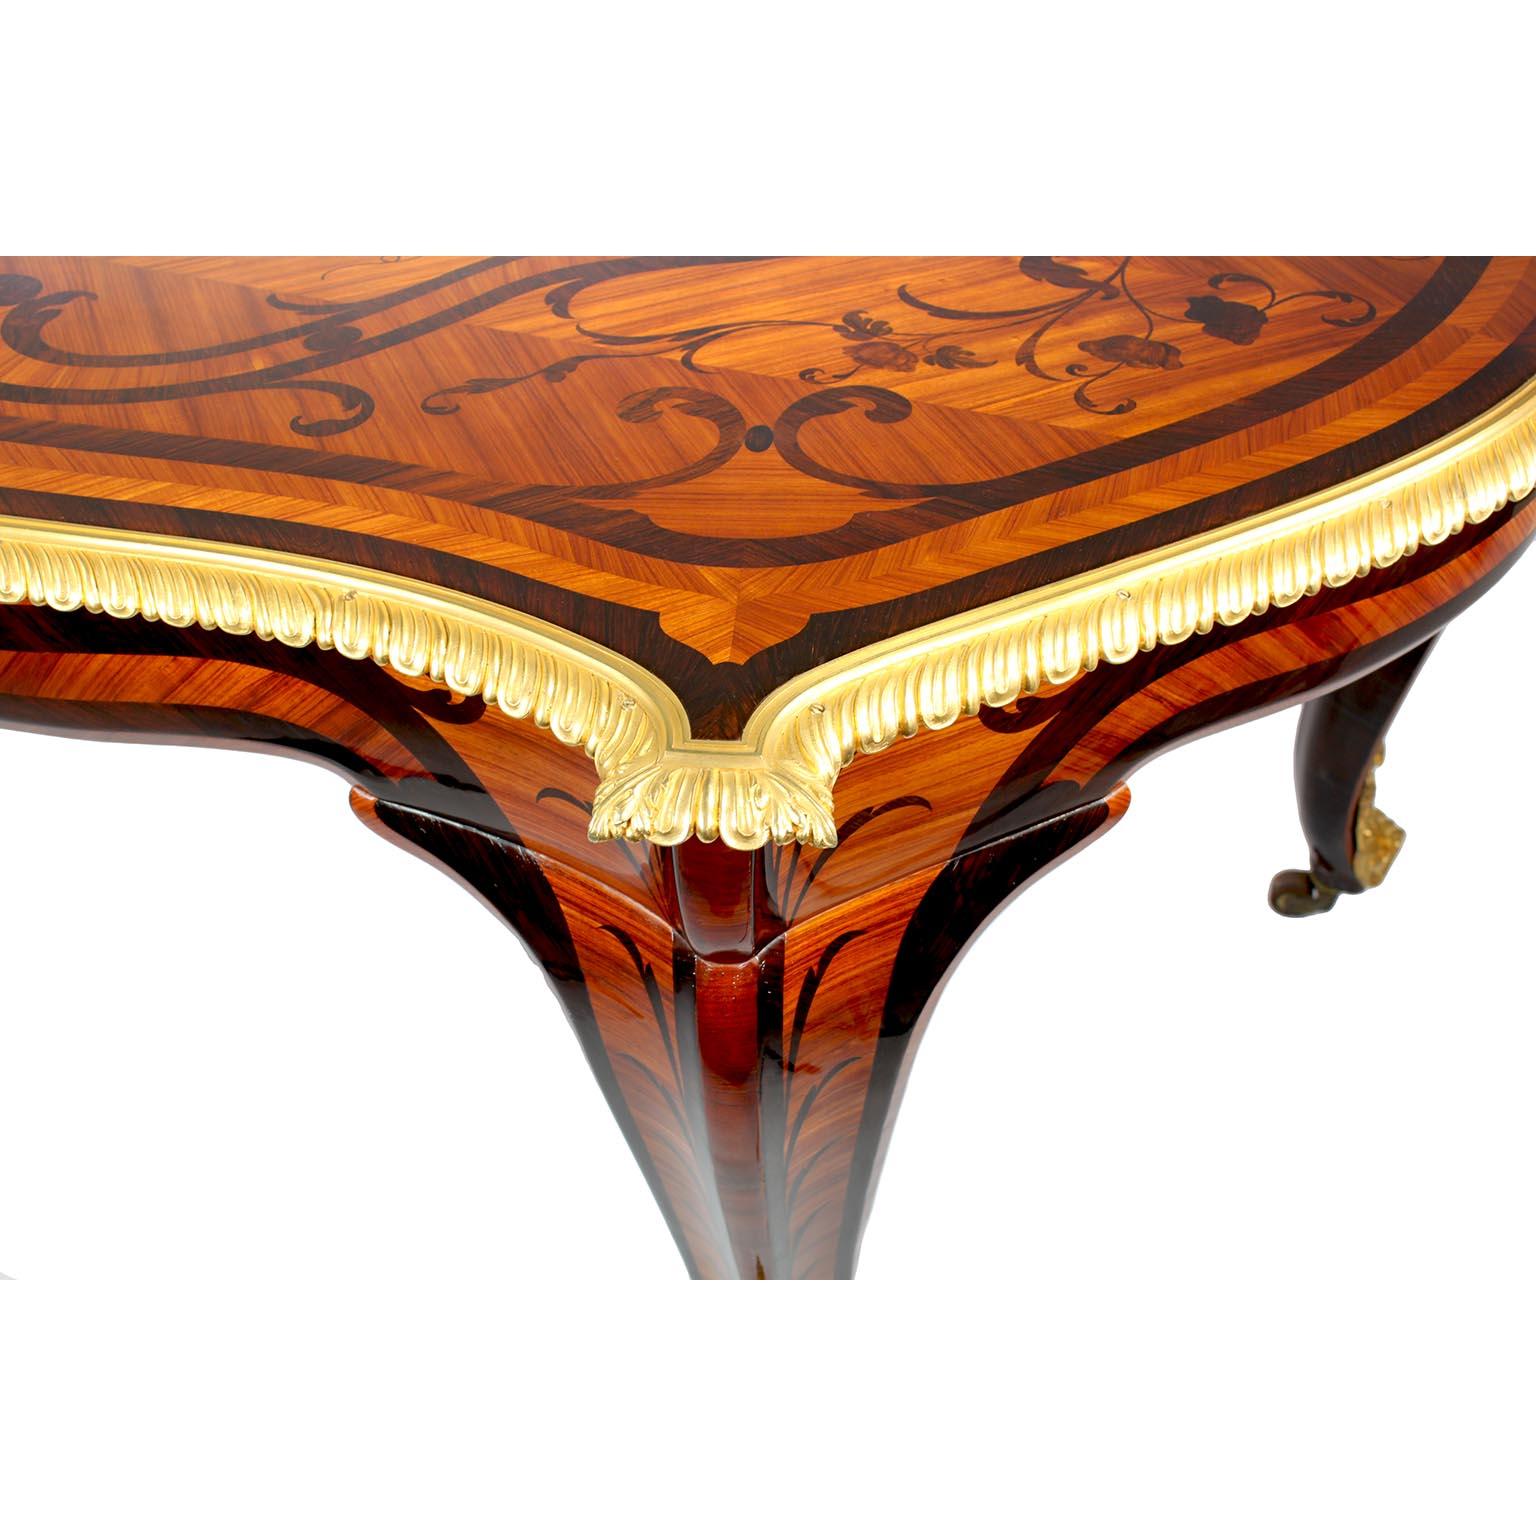 French 19th Century Louis XV Style Kingwood Marquetry Ormolu-Mounted Desk Table For Sale 2